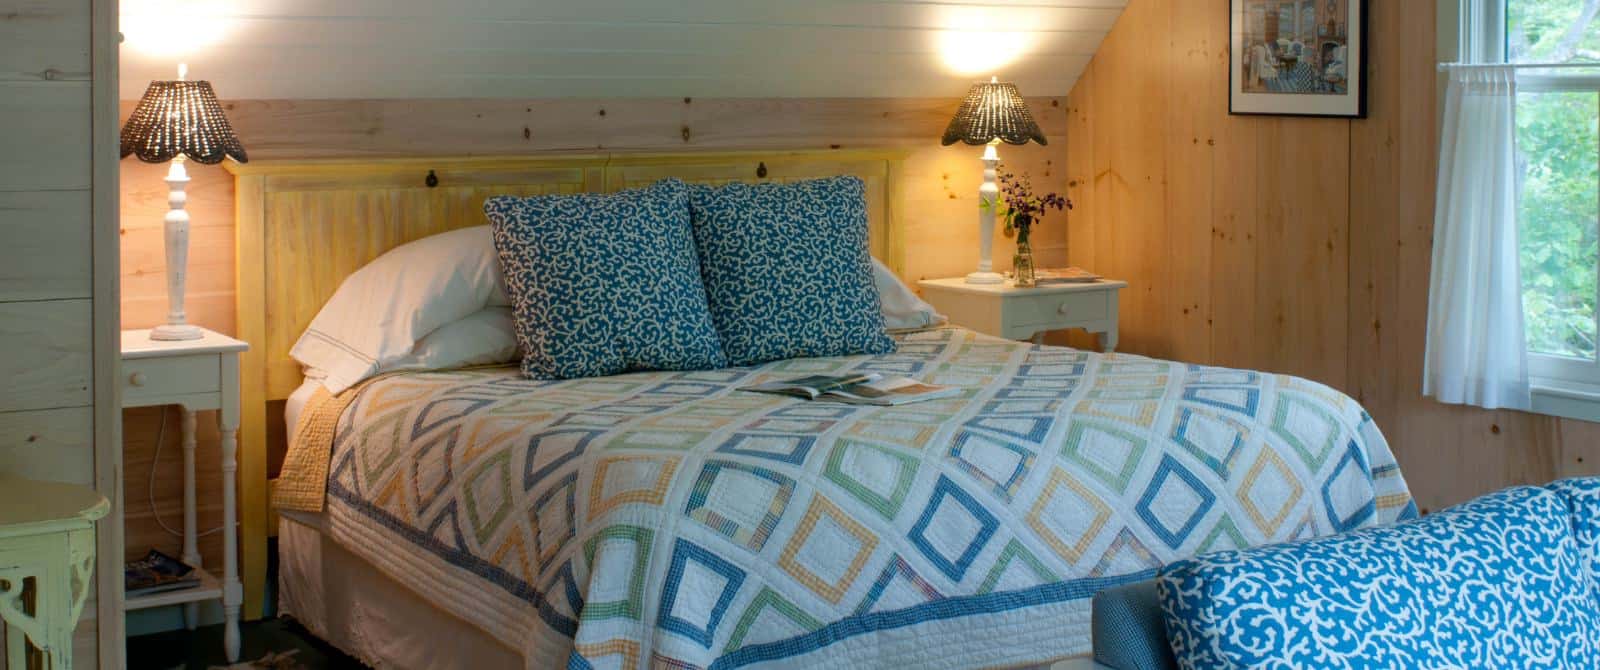 Large bed with a wooden headboard made up with a pretty quilt and blue pillows which match the couch cushions.